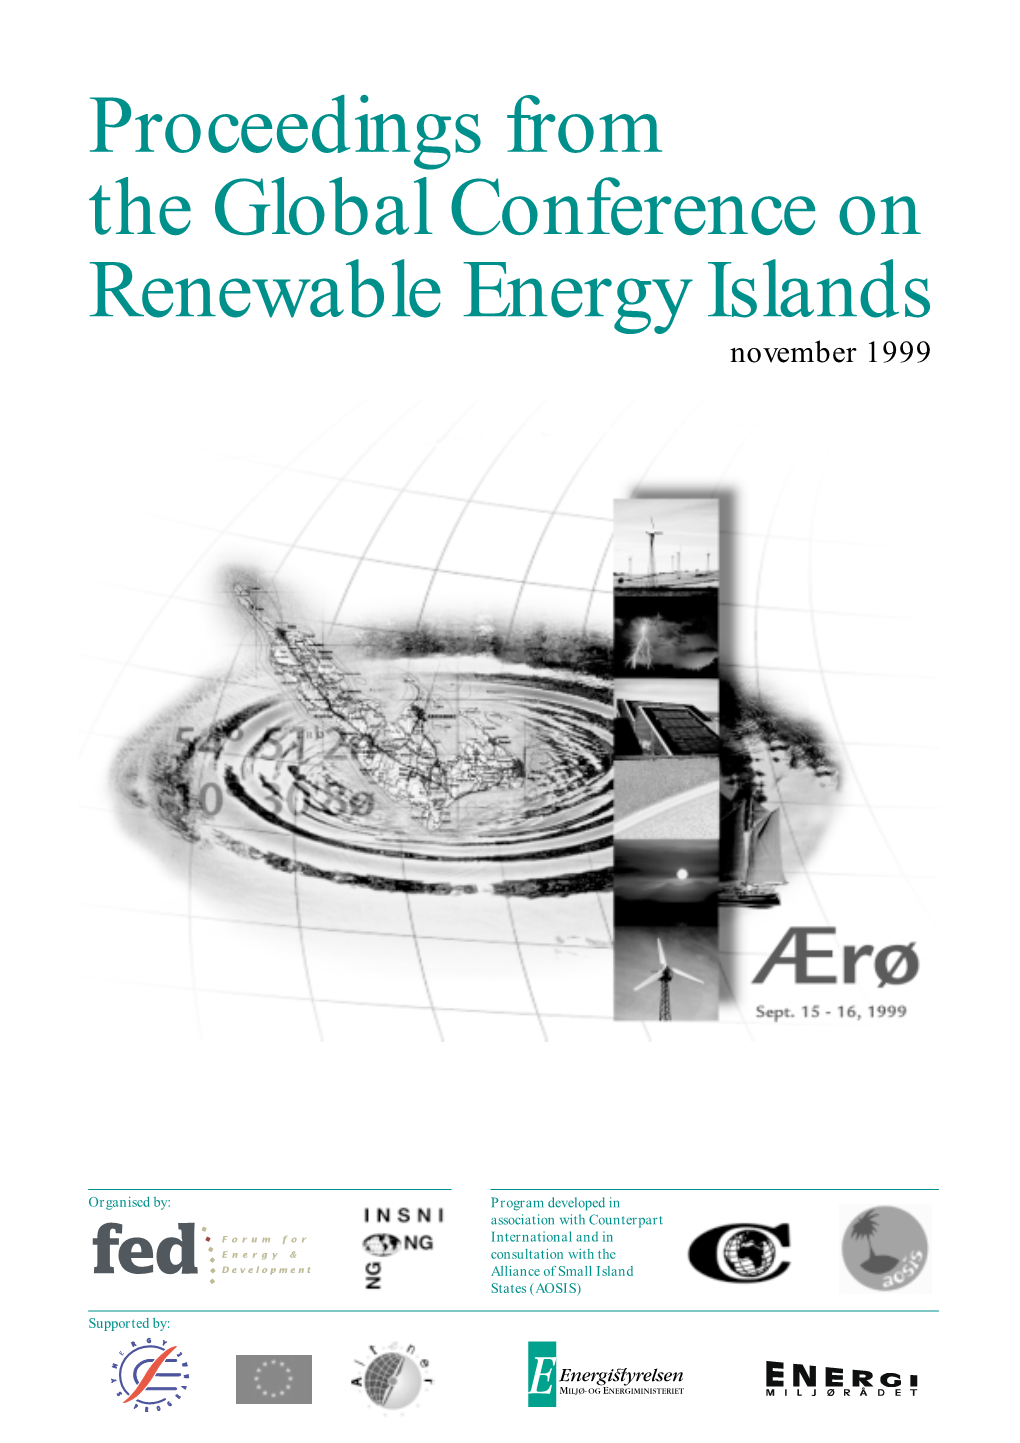 Proceedings from the Global Conference on Renewable Energy Islands November 1999